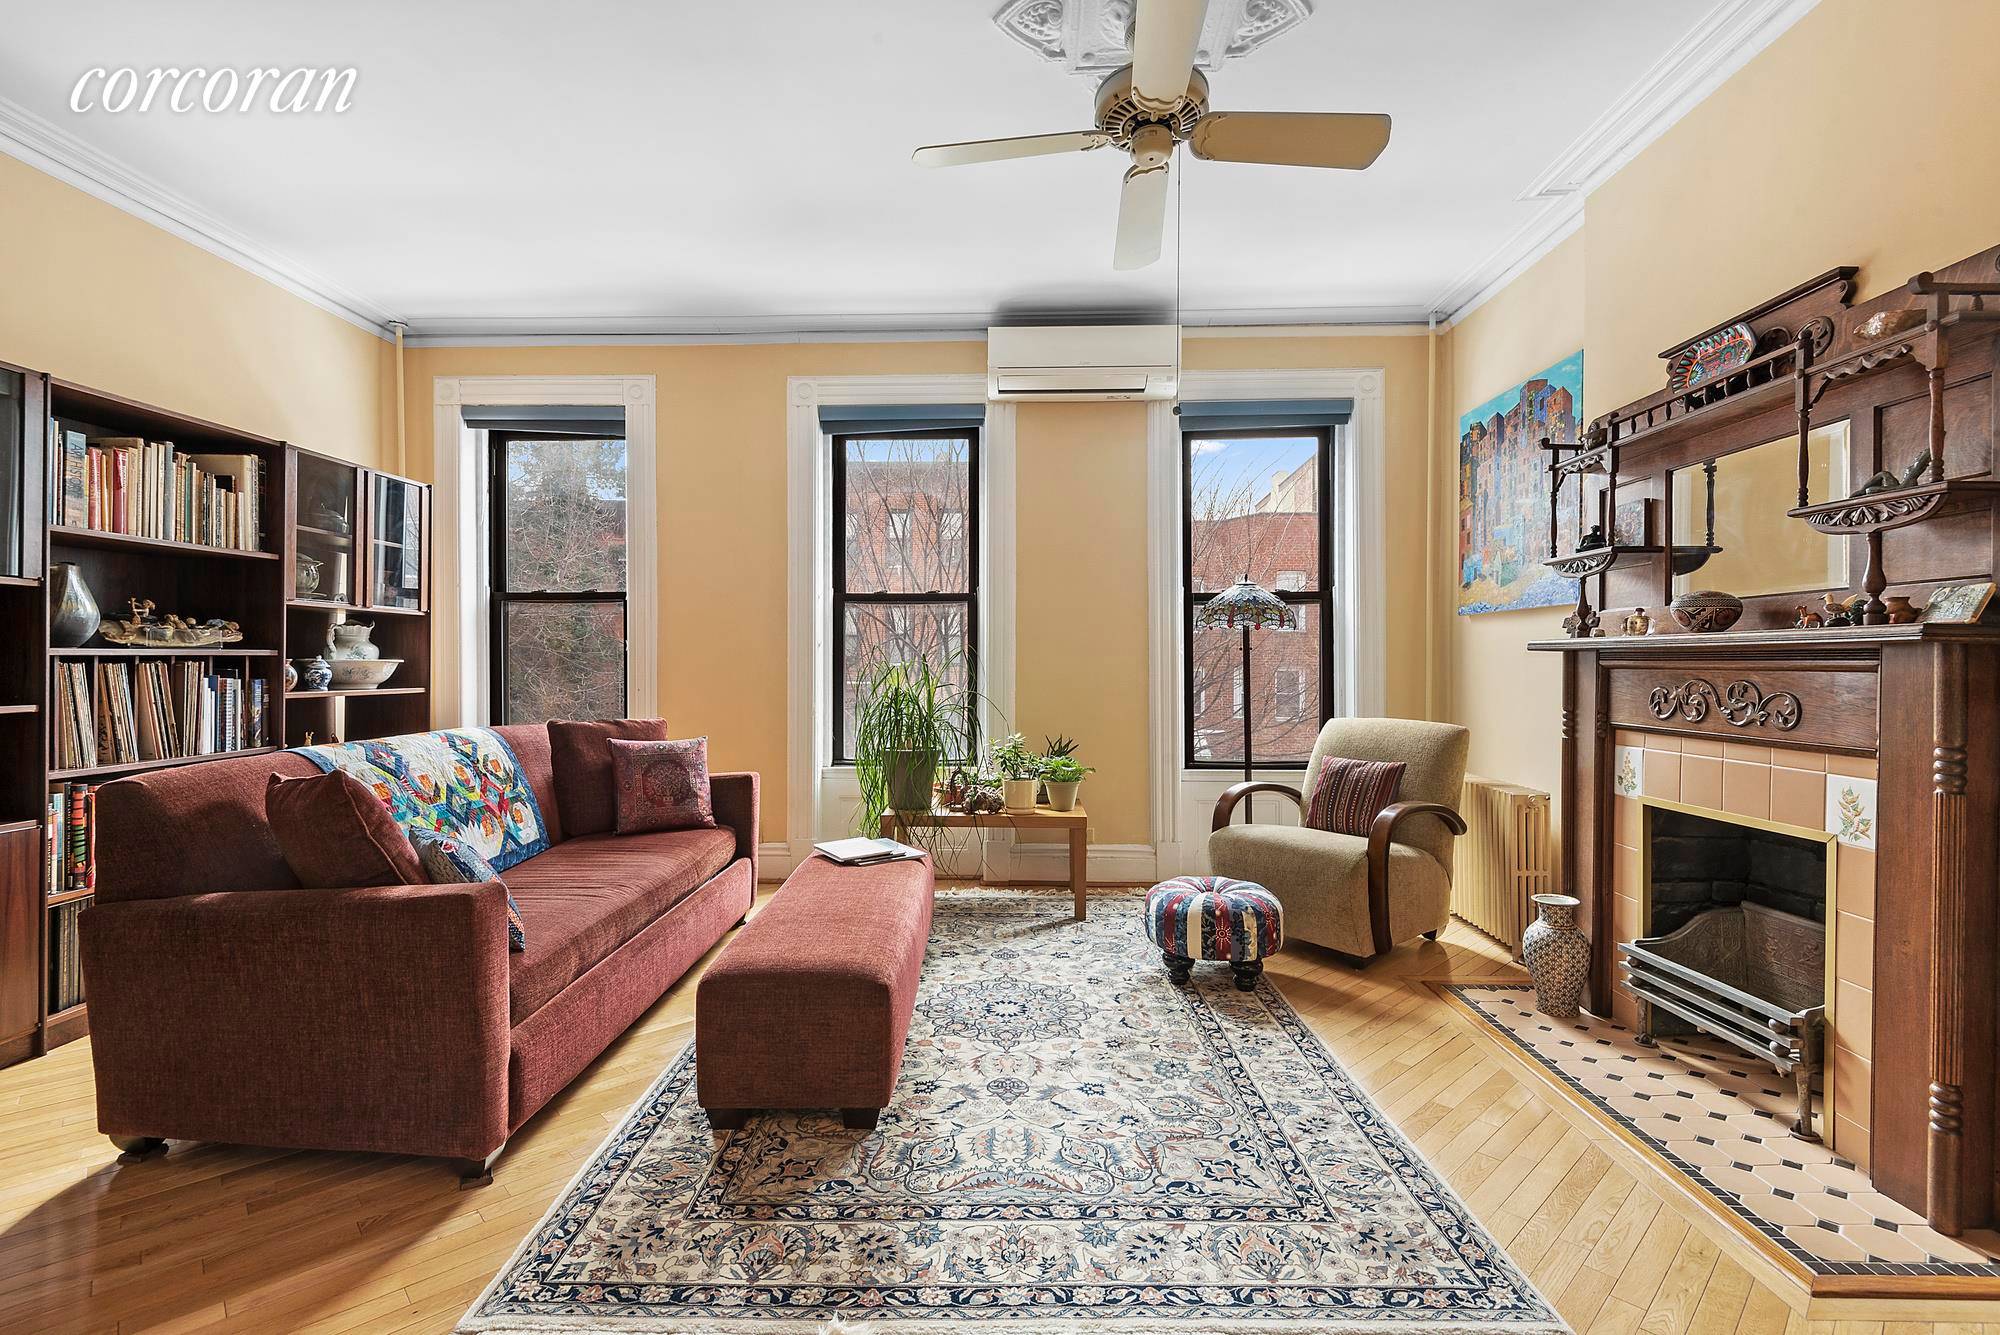 Located in the heart of South Slope and only half a block below vibrant Seventh Avenue, this lovingly maintained two family brick row house boasts real Brooklyn charm.